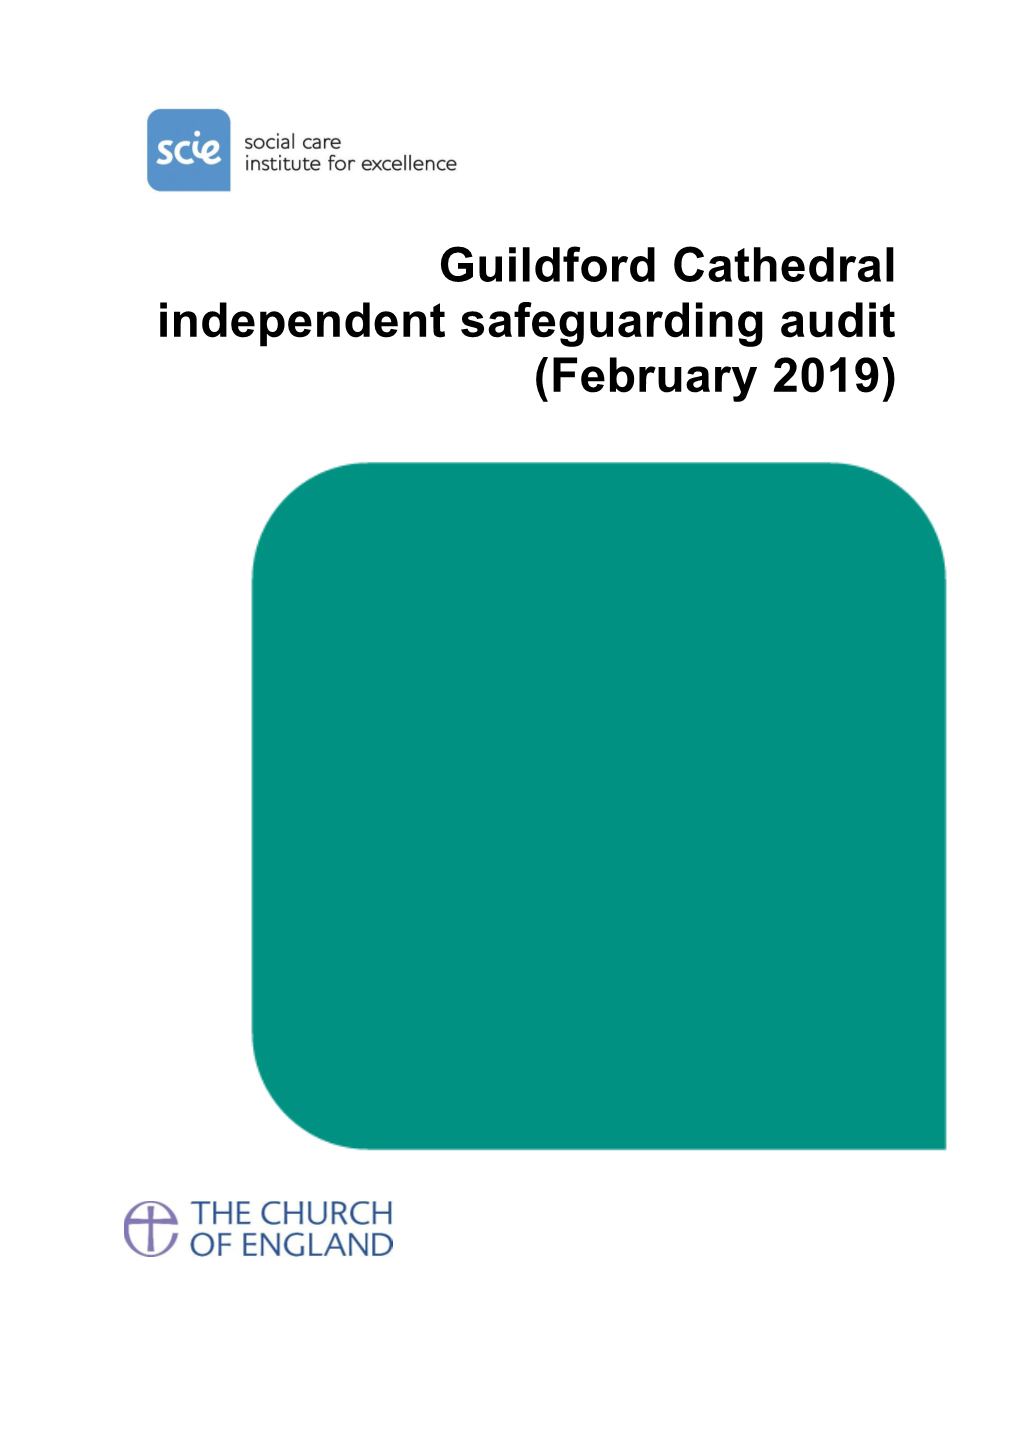 Guildford Cathedral Independent Safeguarding Audit (February 2019)